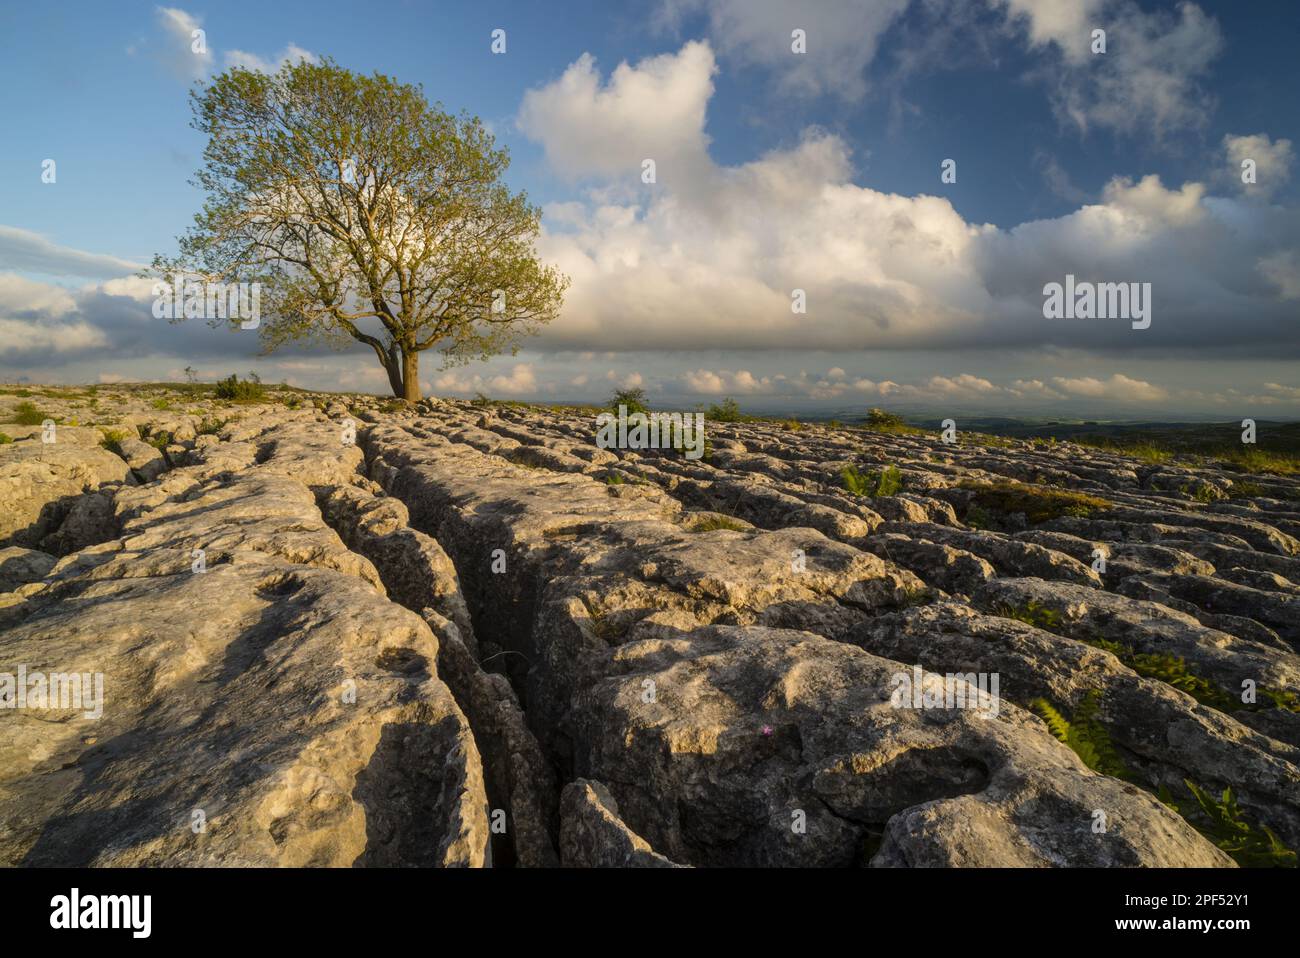 Ash, Common Ash, european ash (Fraxinus excelsior), Olive family, View of limestone pavement with Common Ash at sunset, Malham Lings, Malham Stock Photo